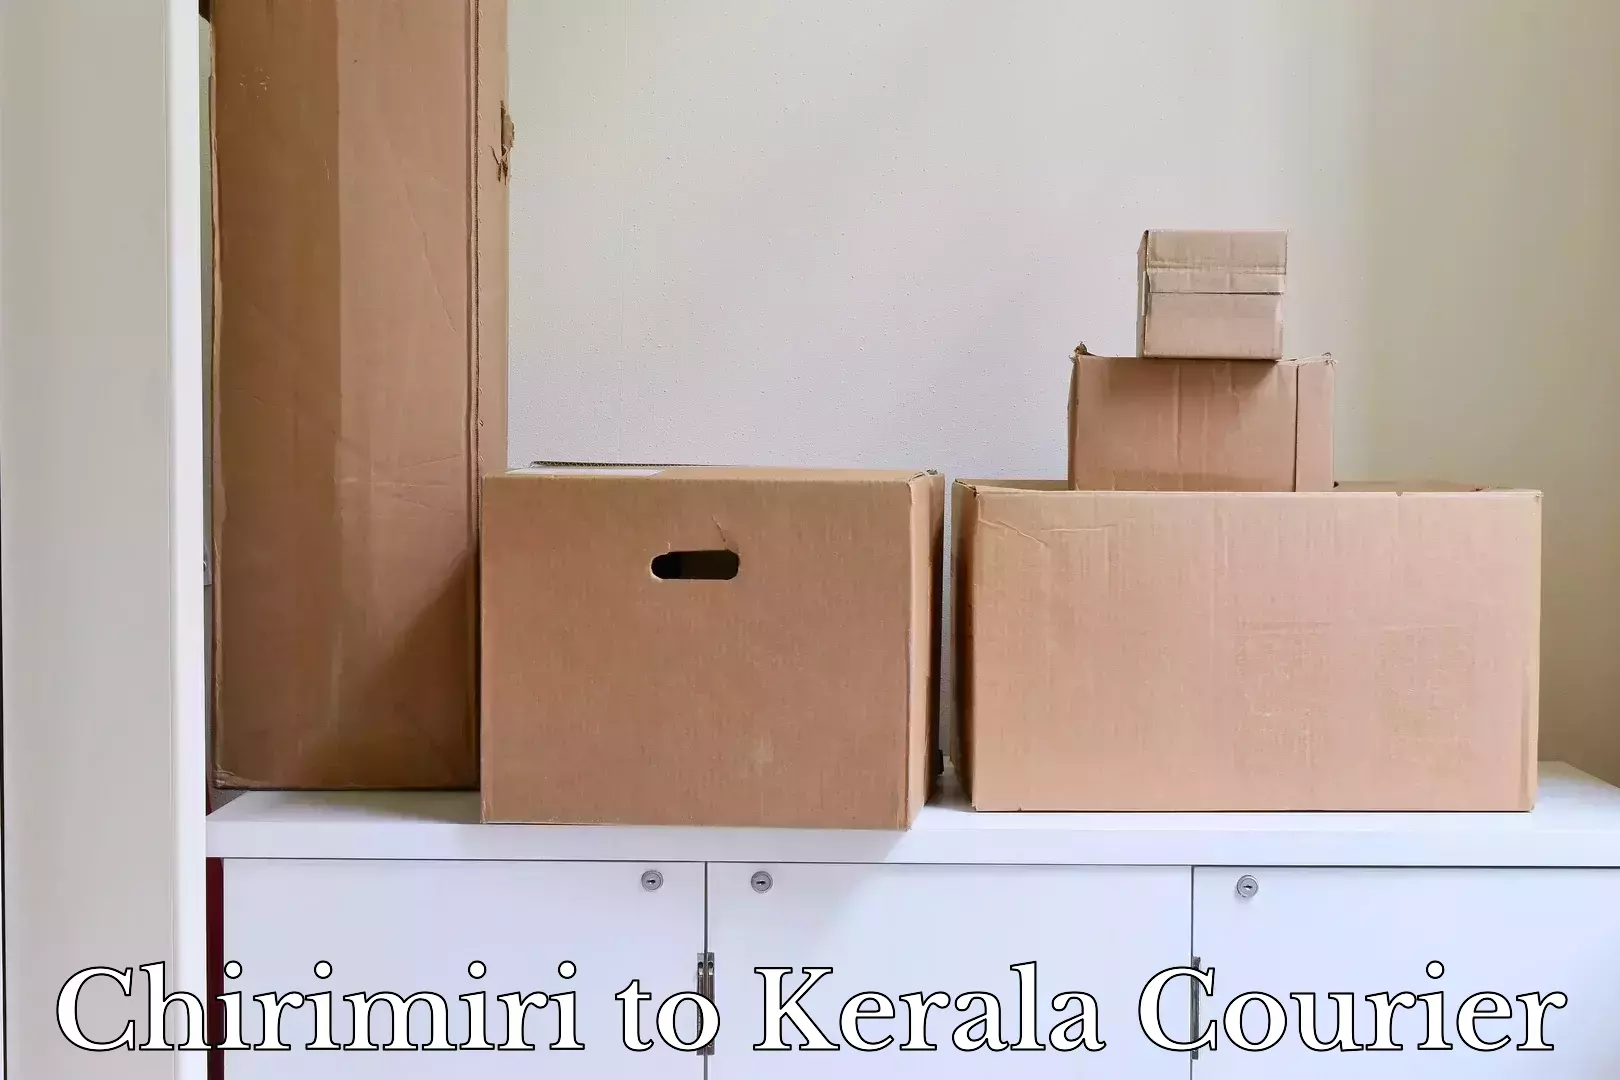 Luggage delivery network Chirimiri to Kerala